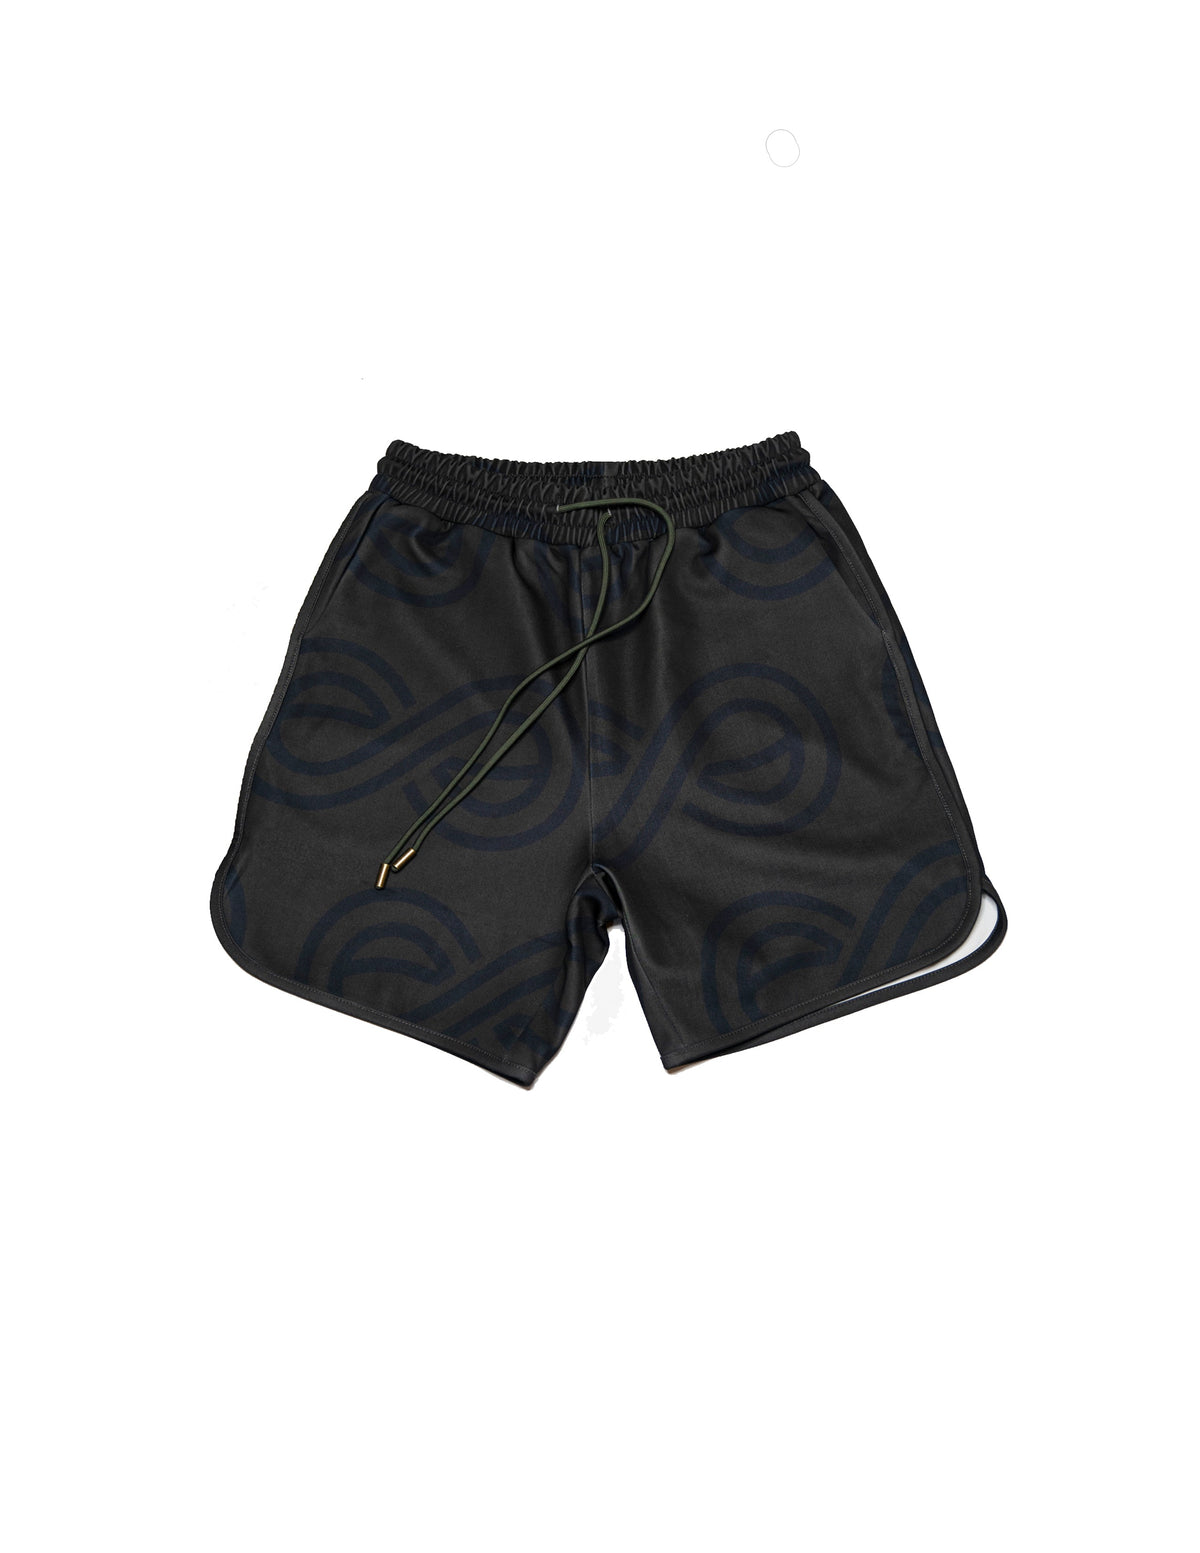 Envy Forever Monogram Shorts (Midnight Green) - The Shade Room Shop